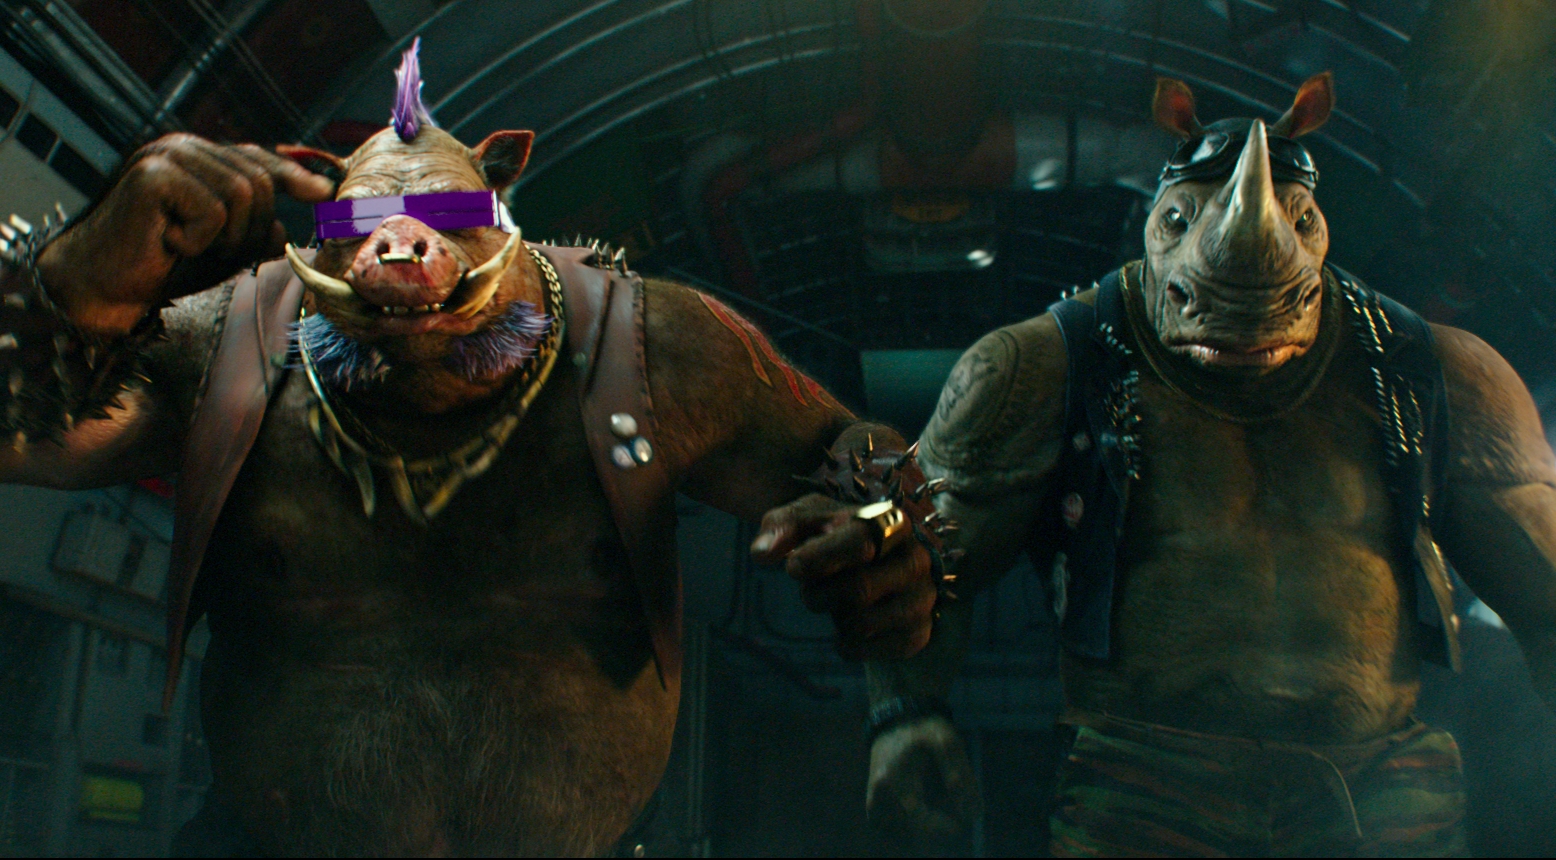 MOVIE REVIEW: Teenage Mutant Ninja Turtles: Out of the Shadows (2016)